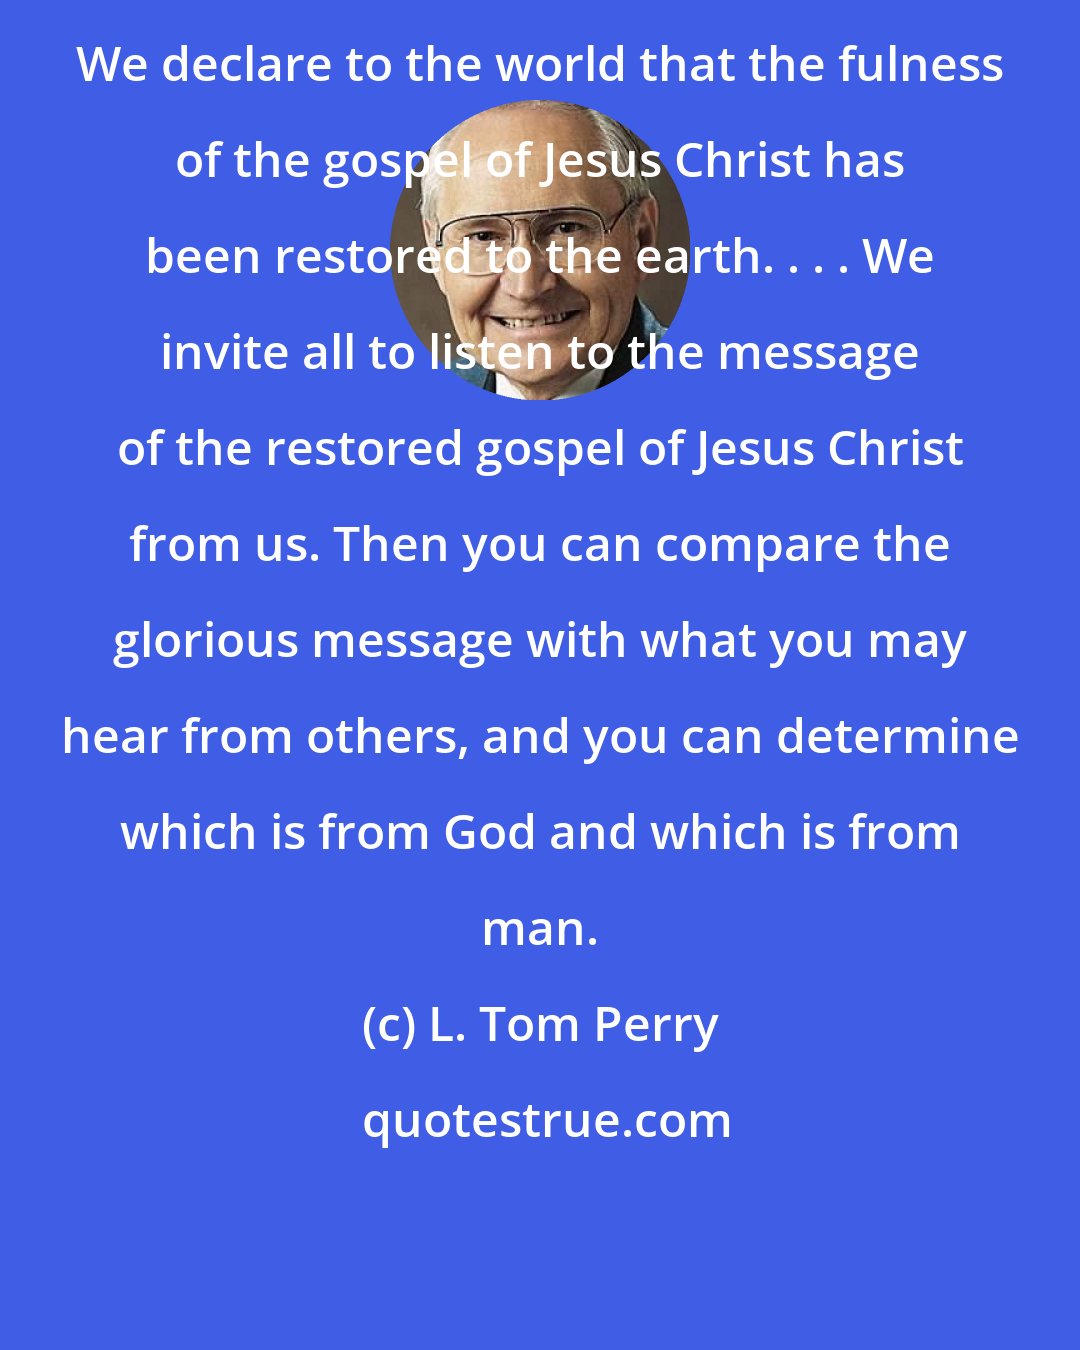 L. Tom Perry: We declare to the world that the fulness of the gospel of Jesus Christ has been restored to the earth. . . . We invite all to listen to the message of the restored gospel of Jesus Christ from us. Then you can compare the glorious message with what you may hear from others, and you can determine which is from God and which is from man.